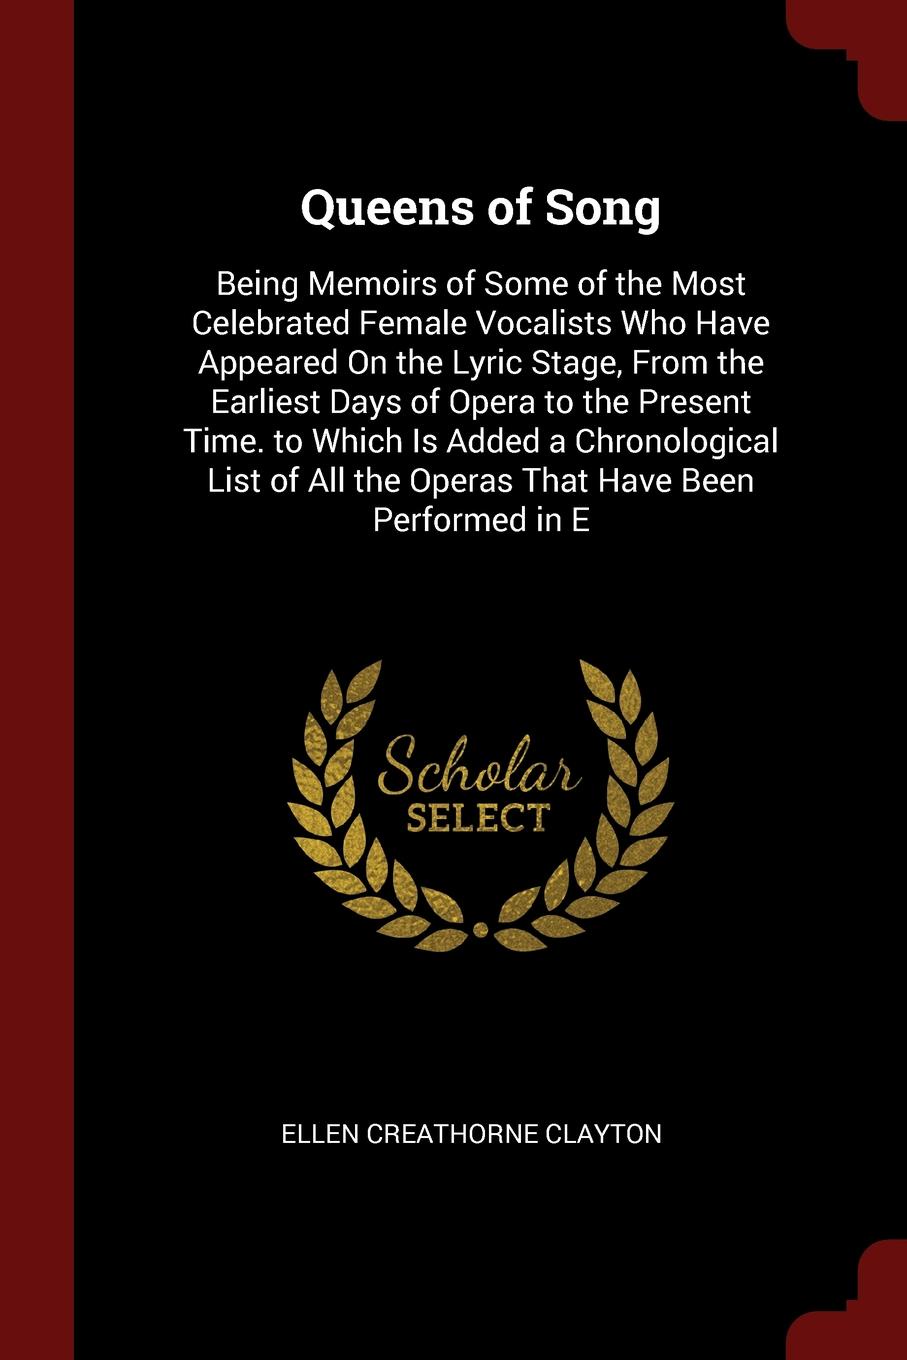 Queens of Song. Being Memoirs of Some of the Most Celebrated Female Vocalists Who Have Appeared On the Lyric Stage, From the Earliest Days of Opera to the Present Time. to Which Is Added a Chronological List of All the Operas That Have Been Perfor...